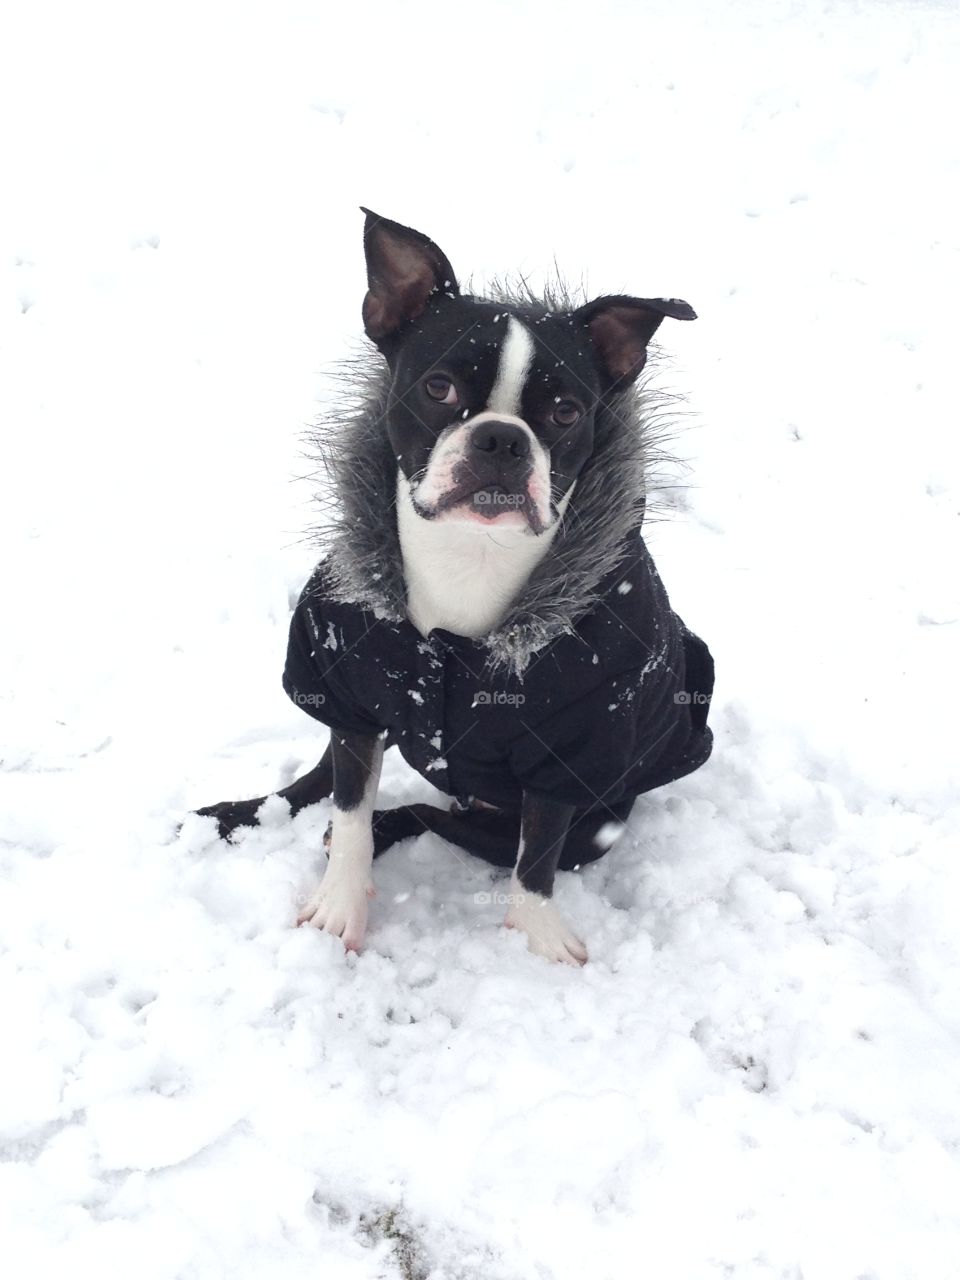 dog posing in the snow in his fur jacket 